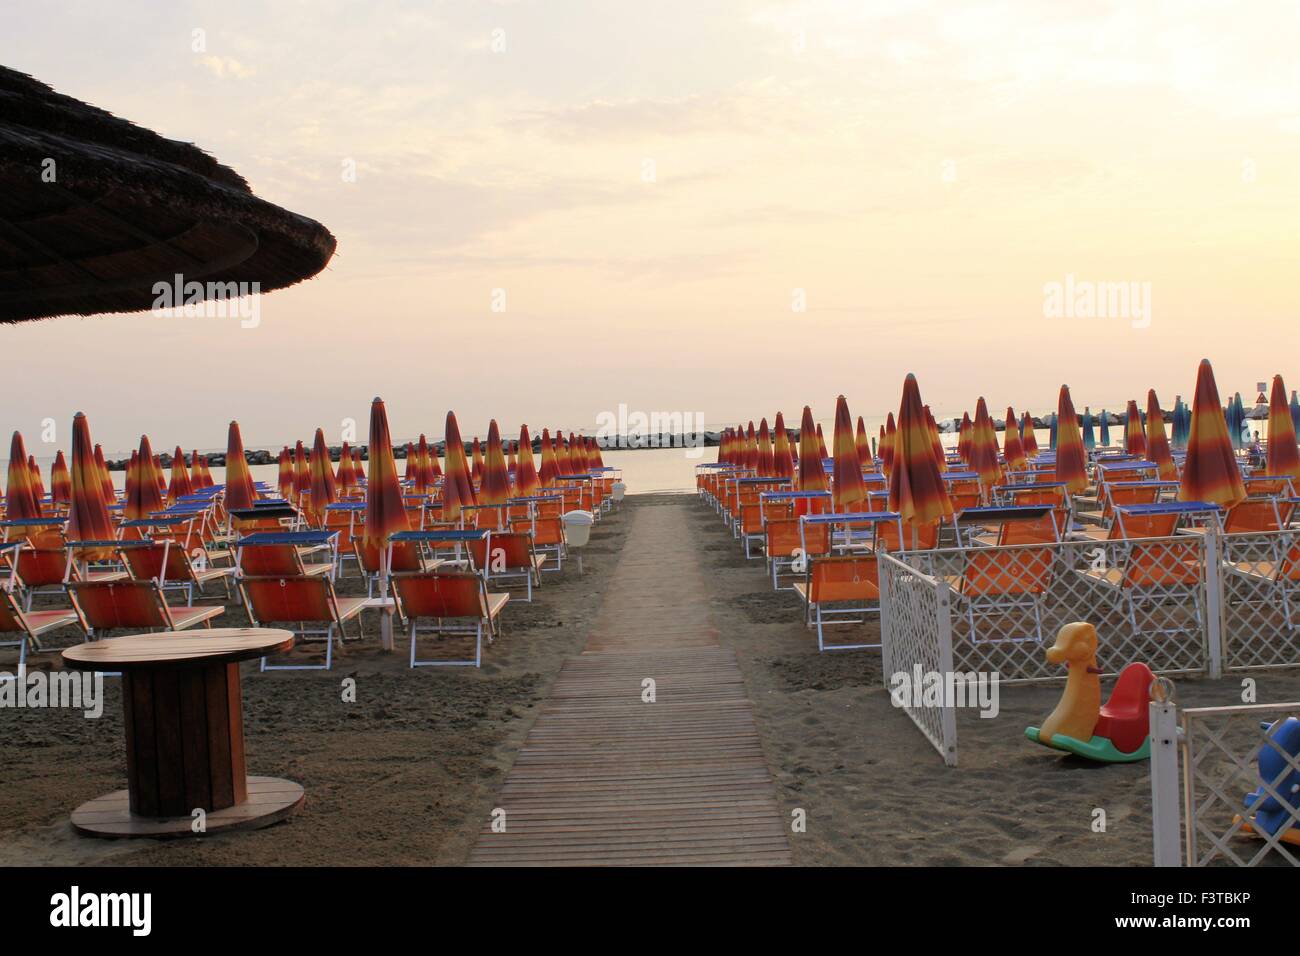 Gatteo beach on the Adriatic sea in Italy in the morning Stock Photo